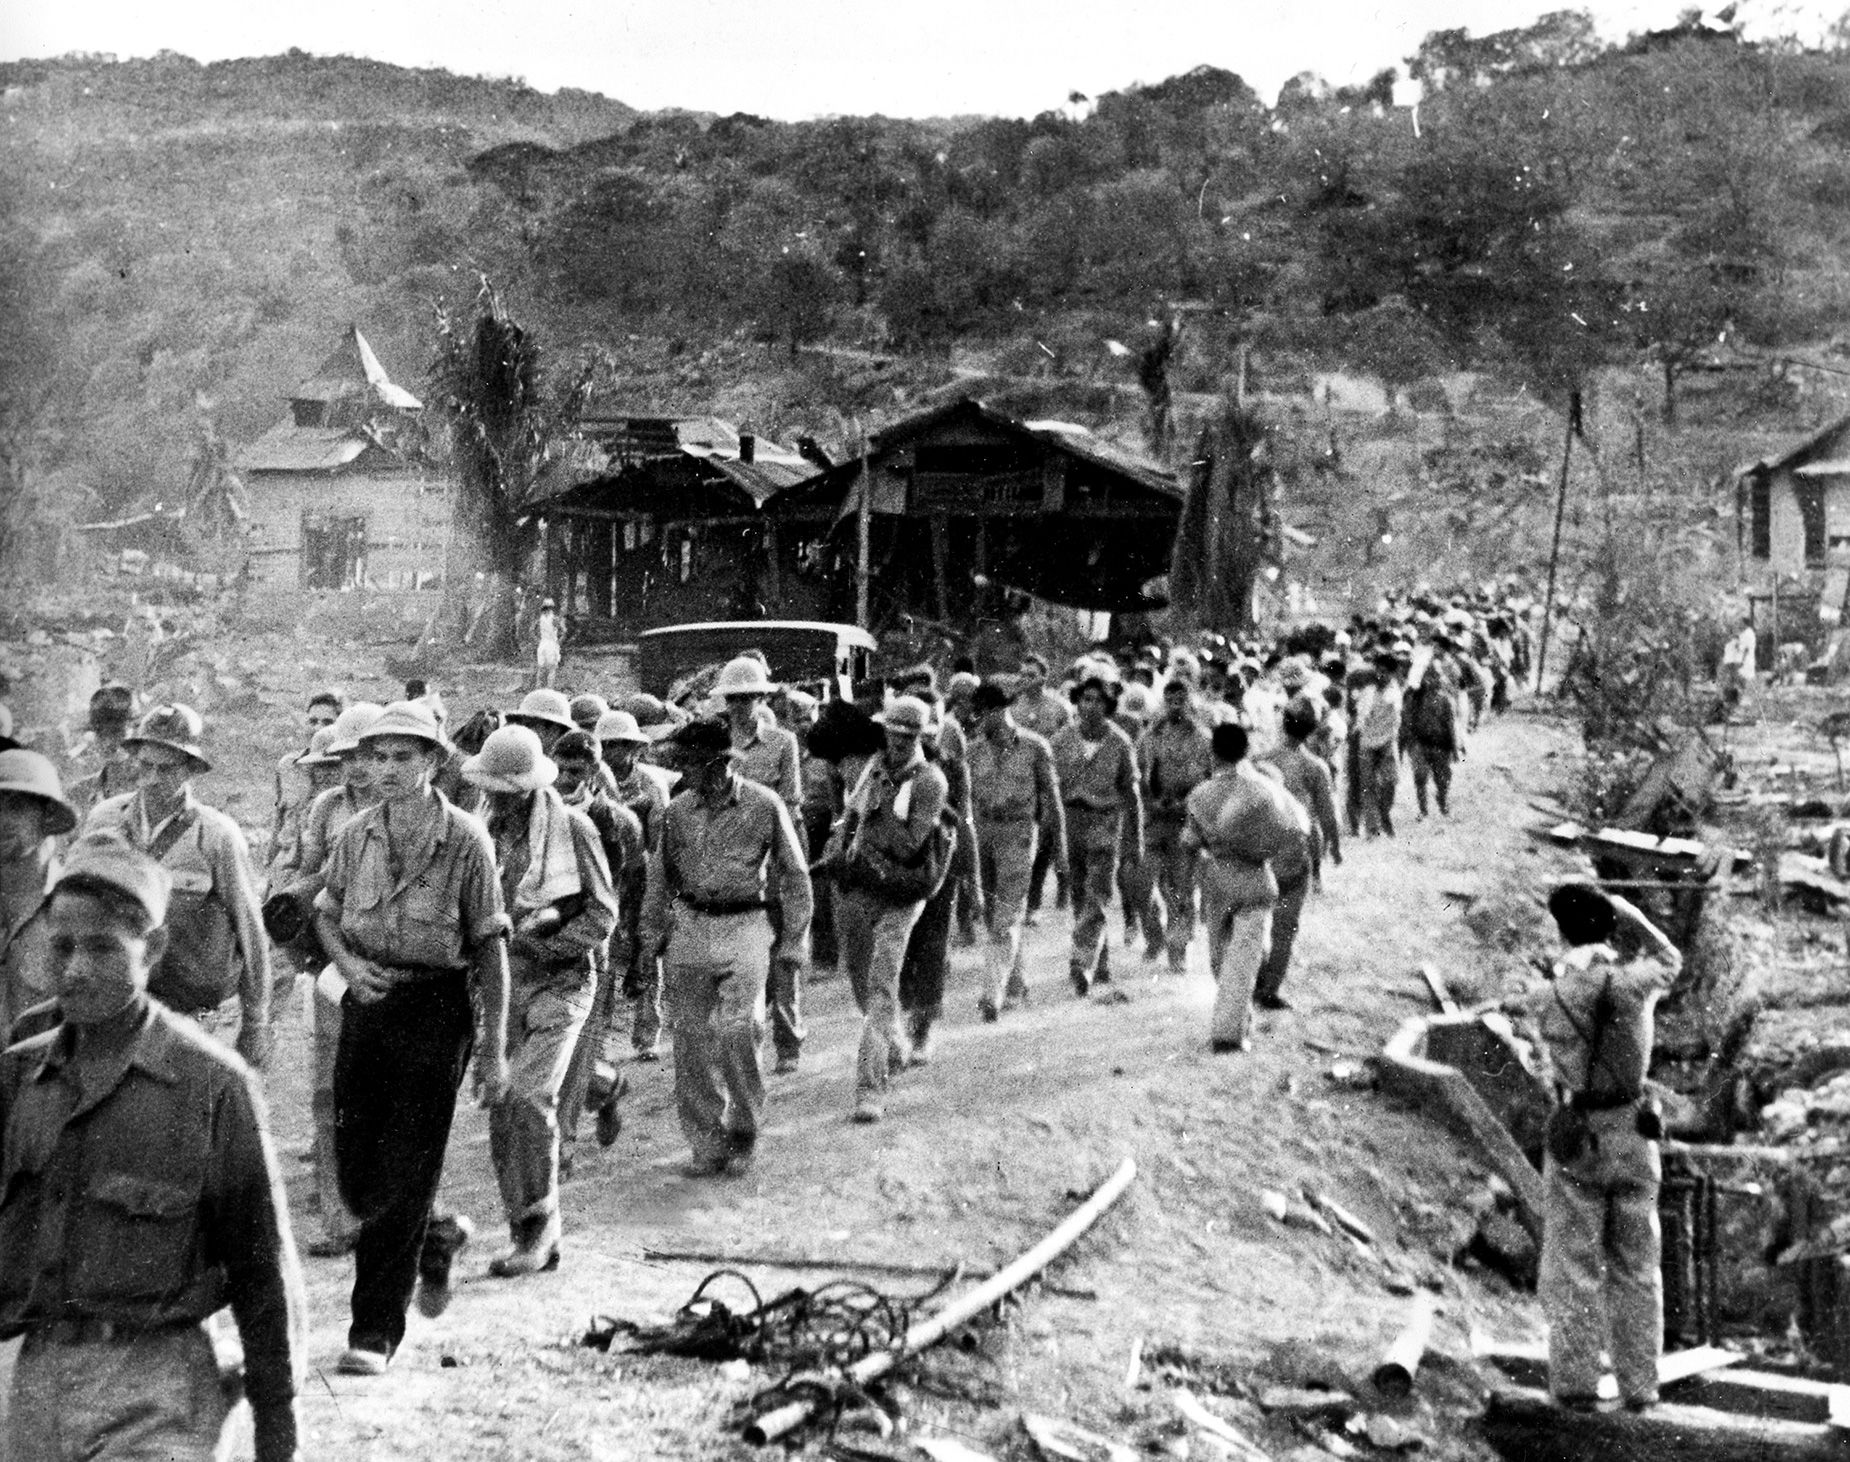 American and Filipino prisoners of war captured by the Japanese are shown at the start of the Death March after the surrender of Bataan on April 9 near Mariveles in the Philippines in 1942 during World War II. Starting on April 10 from Mariveles, on the southern end of the Bataan Penisula, 70,000 POWs were force-marched to Camp O'Donnell, a new prison camp 65 miles away. AP